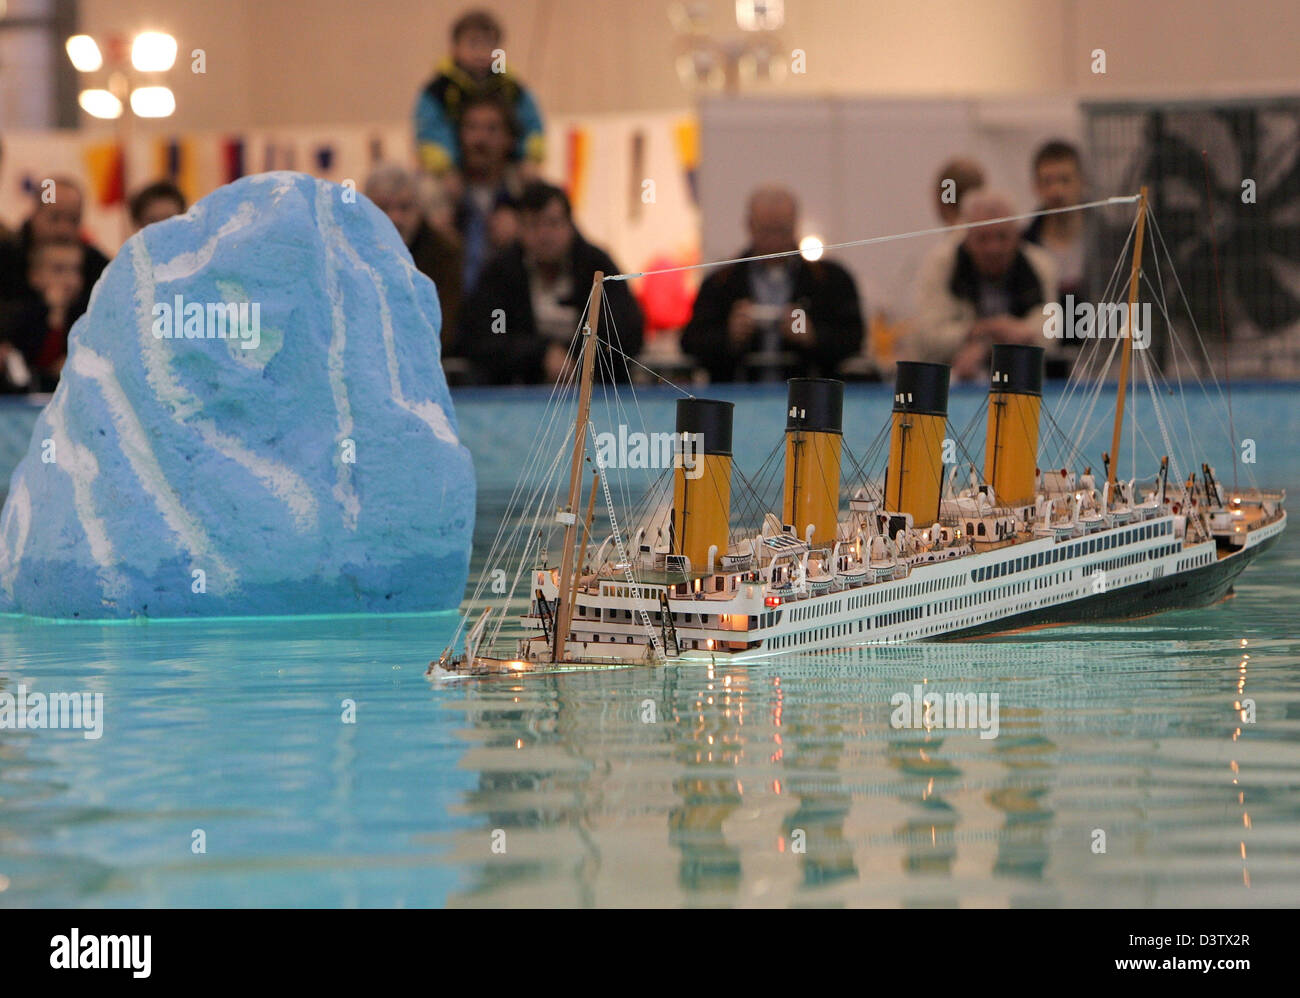 A Model Of The Famous Cruise Liner Titanic Sinks Again At